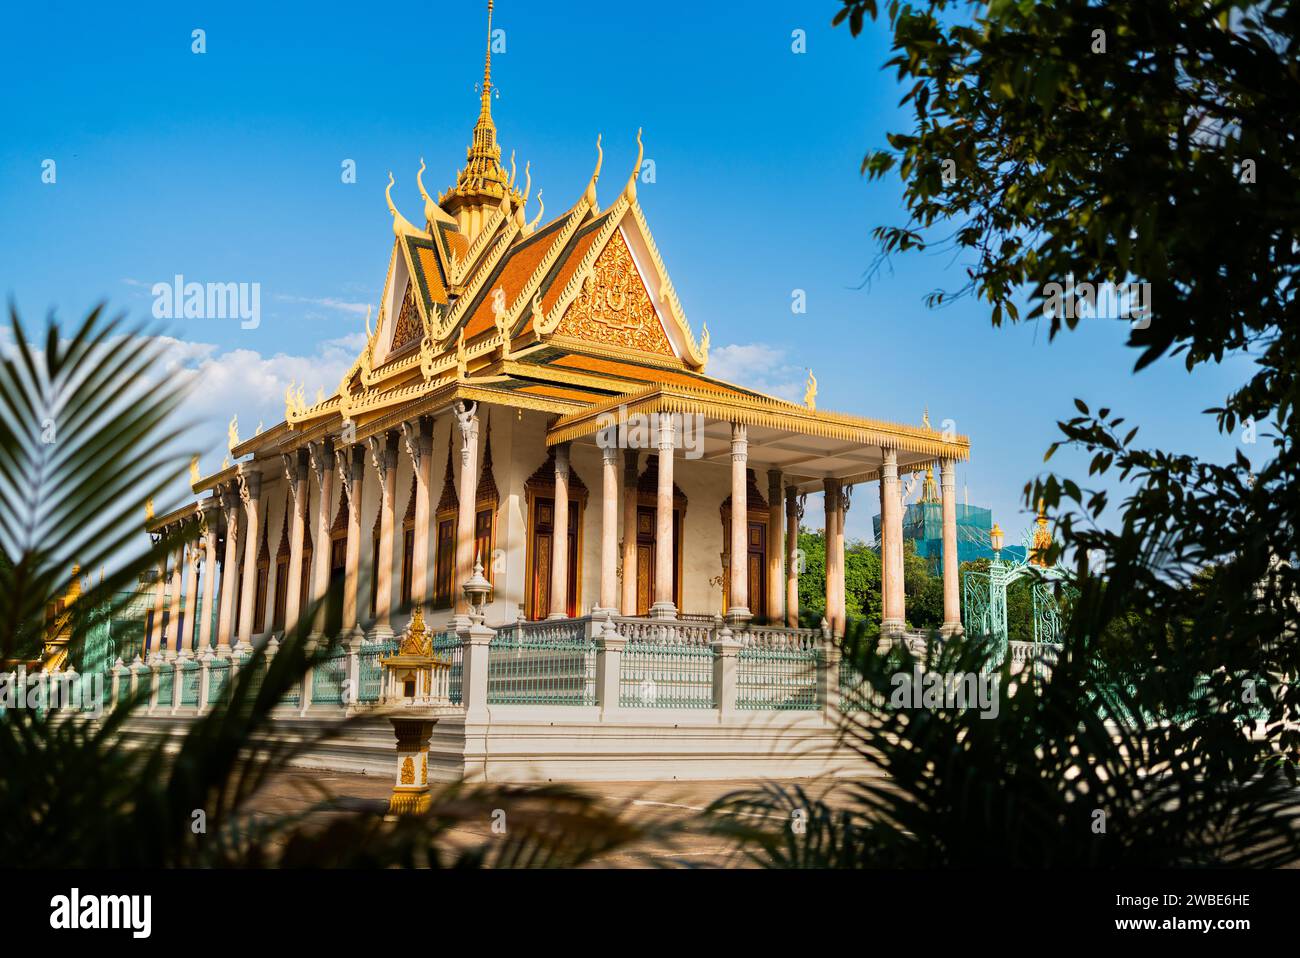 Phnom Penh, Cambodia. Royal Palace, Silver Pagoda. Travel and tourism in Asia. Buddhist culture landmark. Tourist attraction in the capital city. Stock Photo